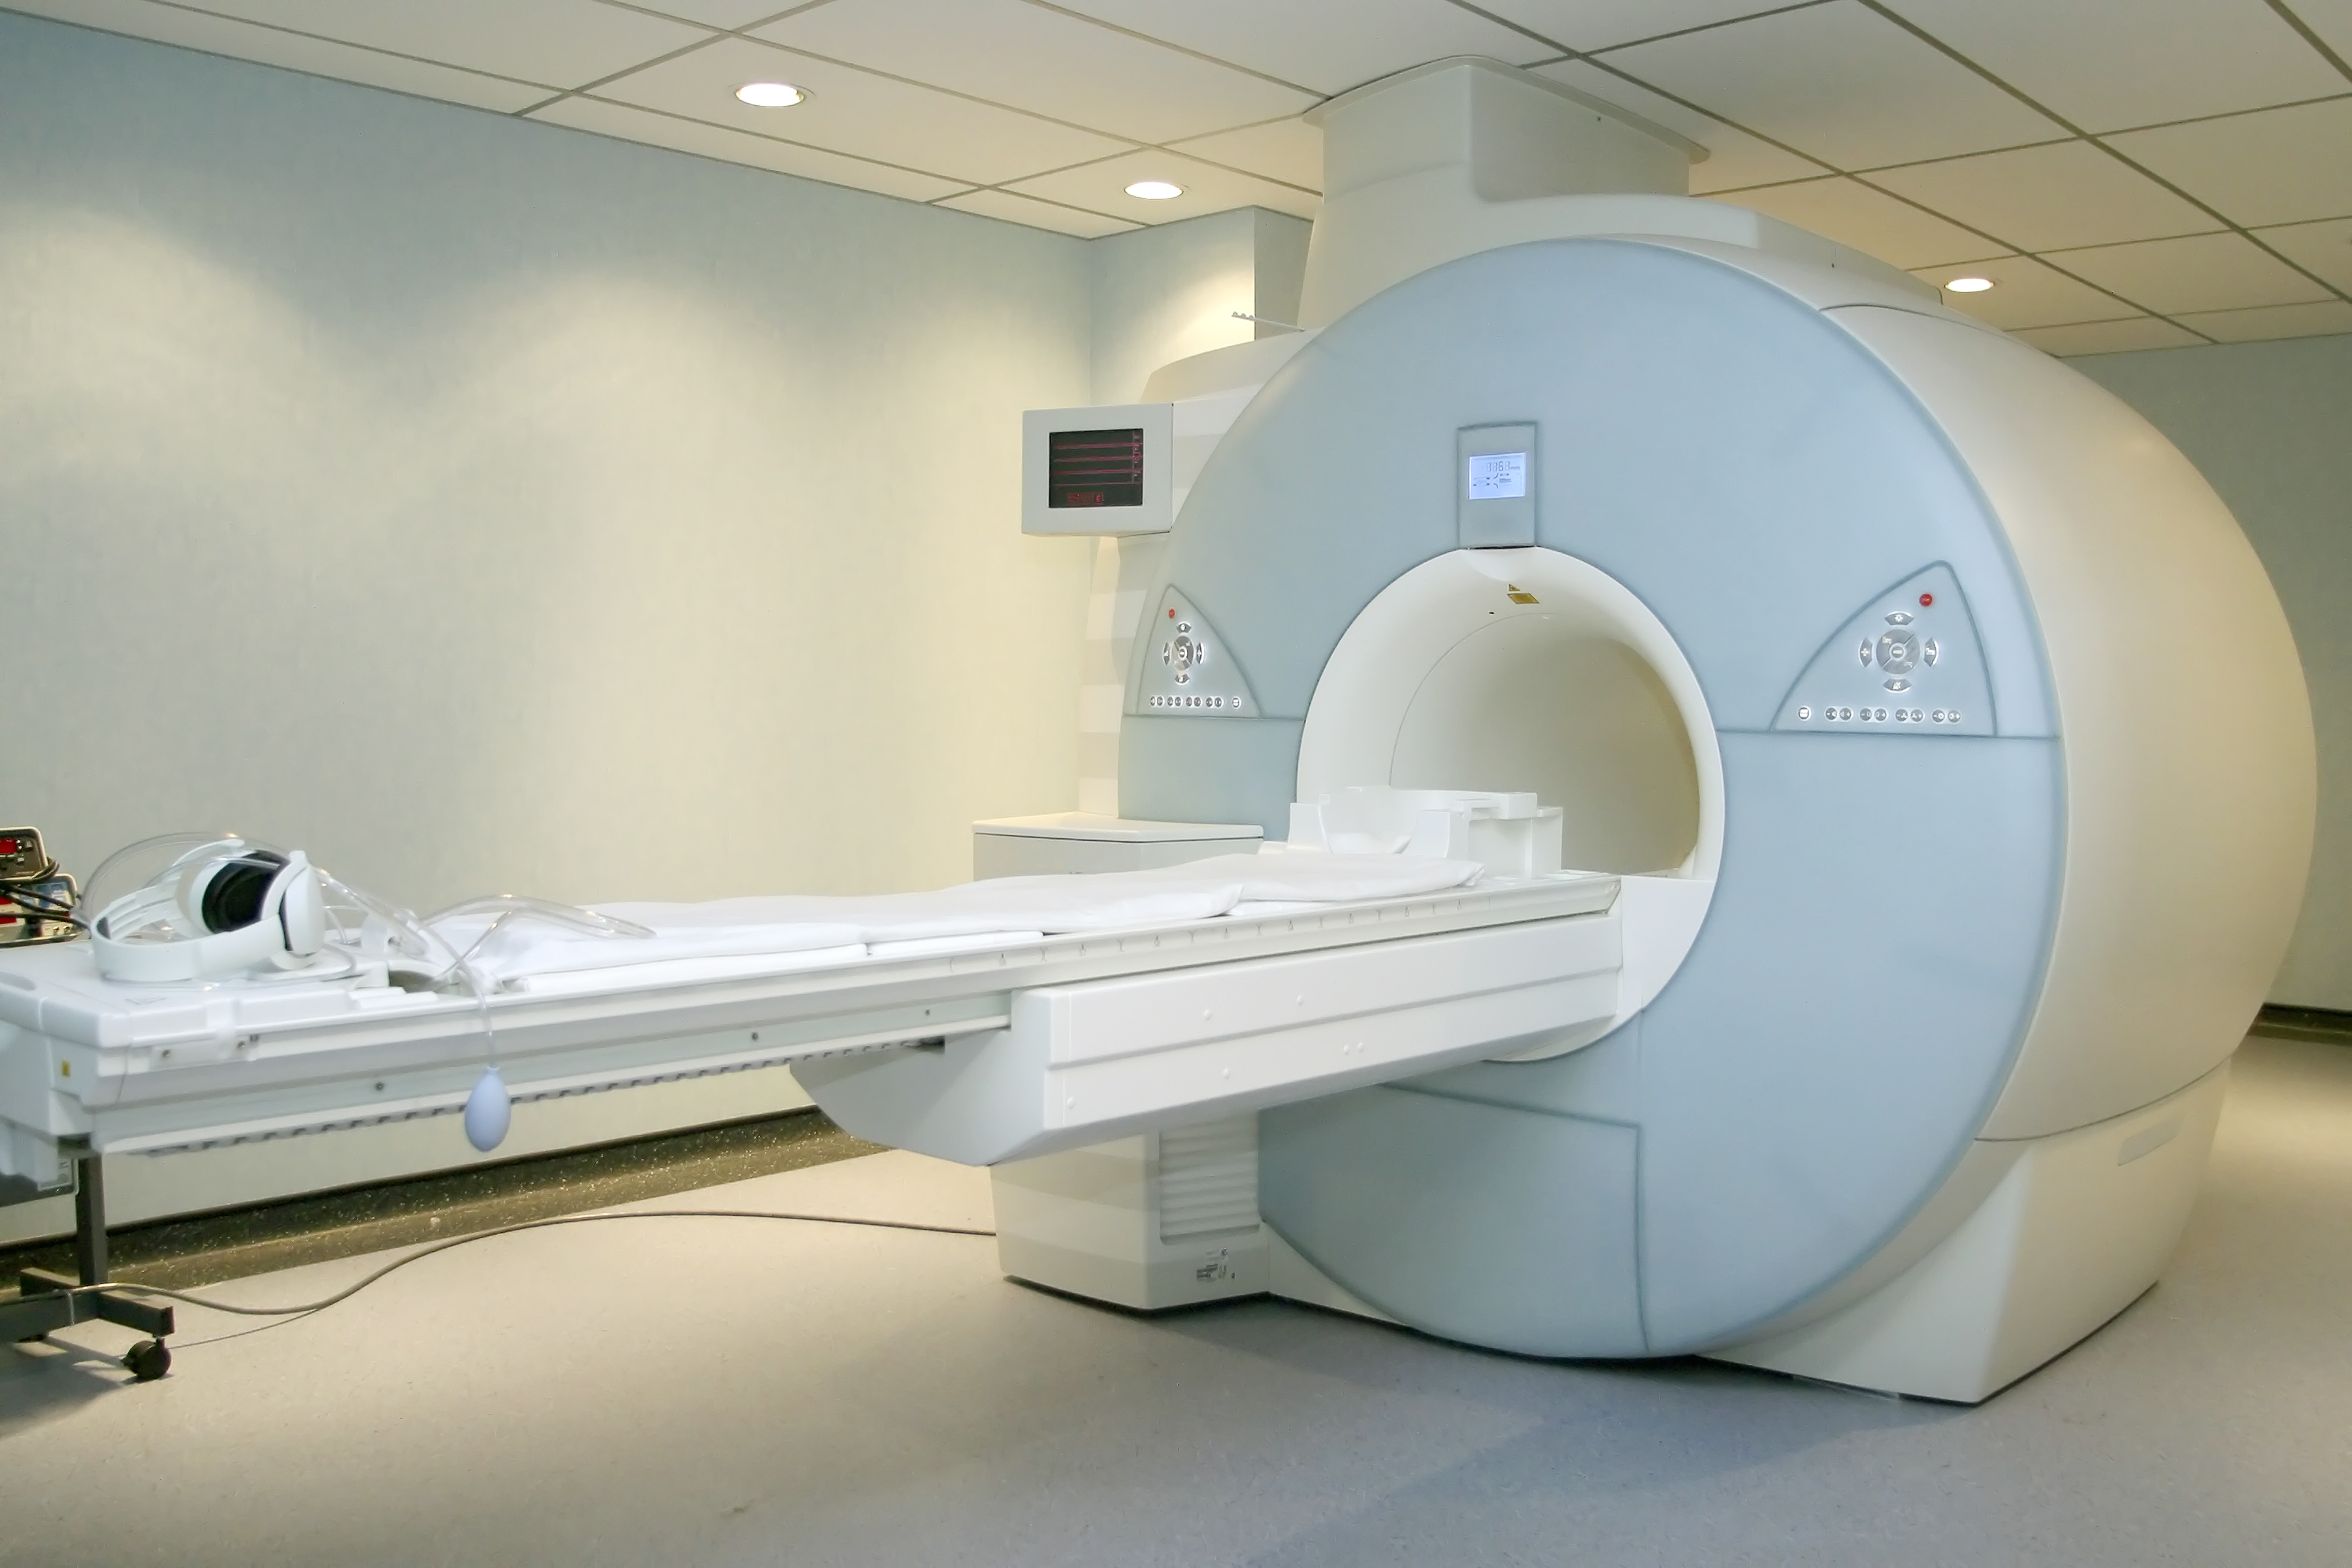 Researchers Recommend Additional PET/CT Scans in Lung Cancer Follow Up